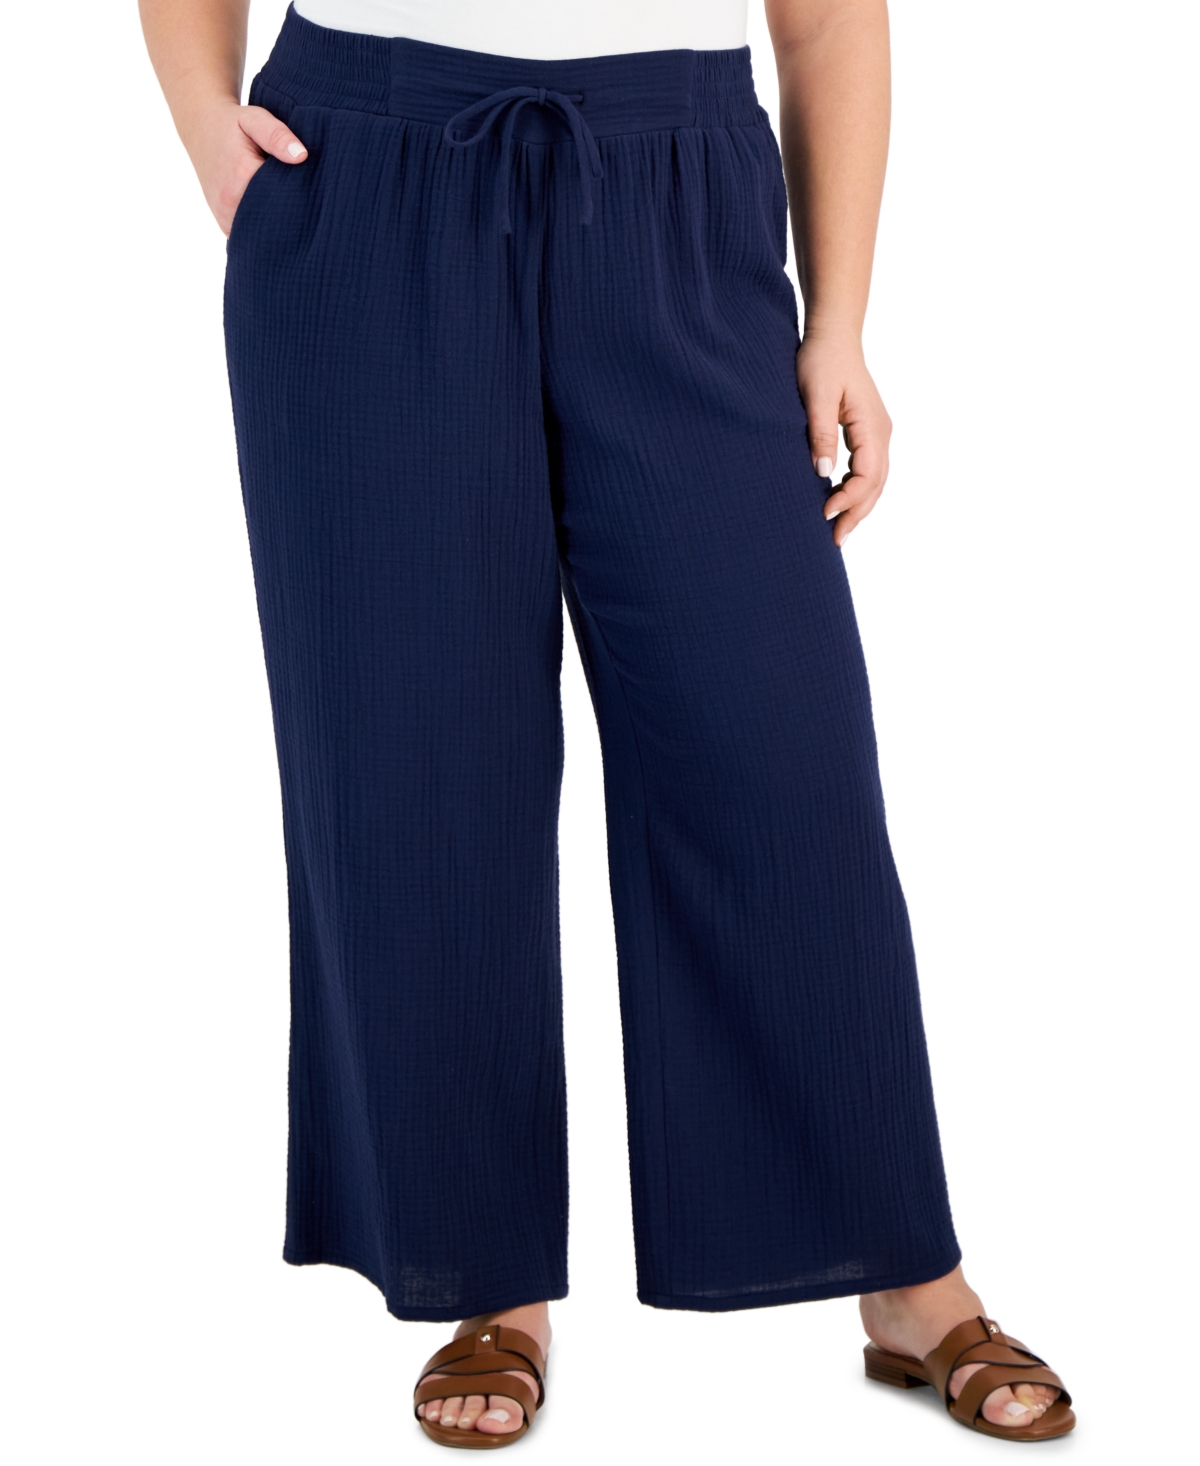 Plus Size Gauze Drawstring Pants, Created for Macy's - Intrepid Blue